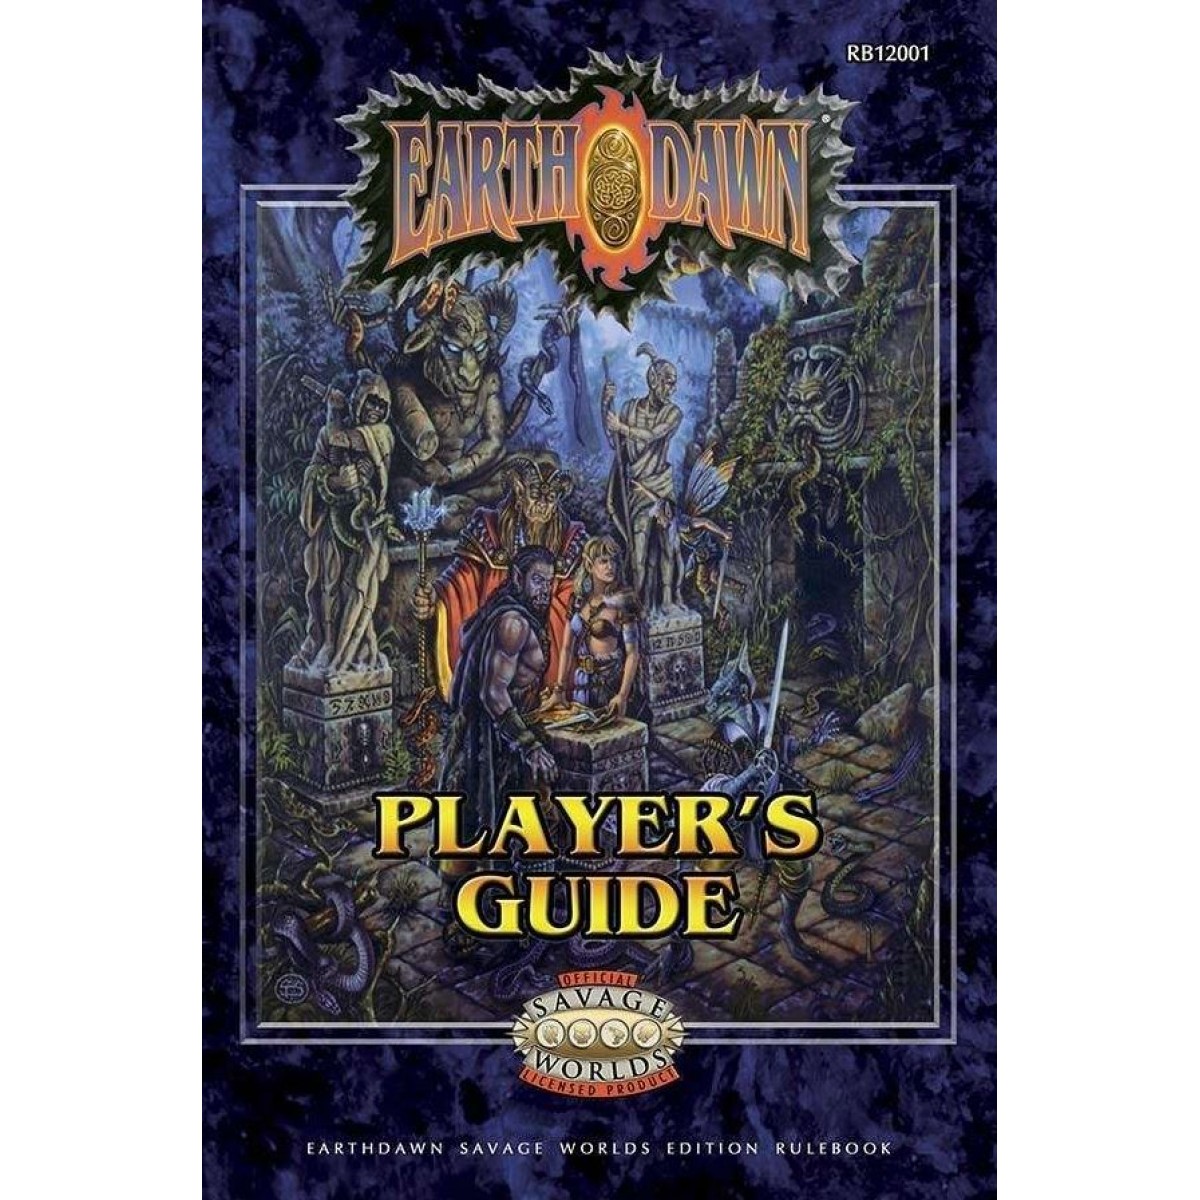 Players guide